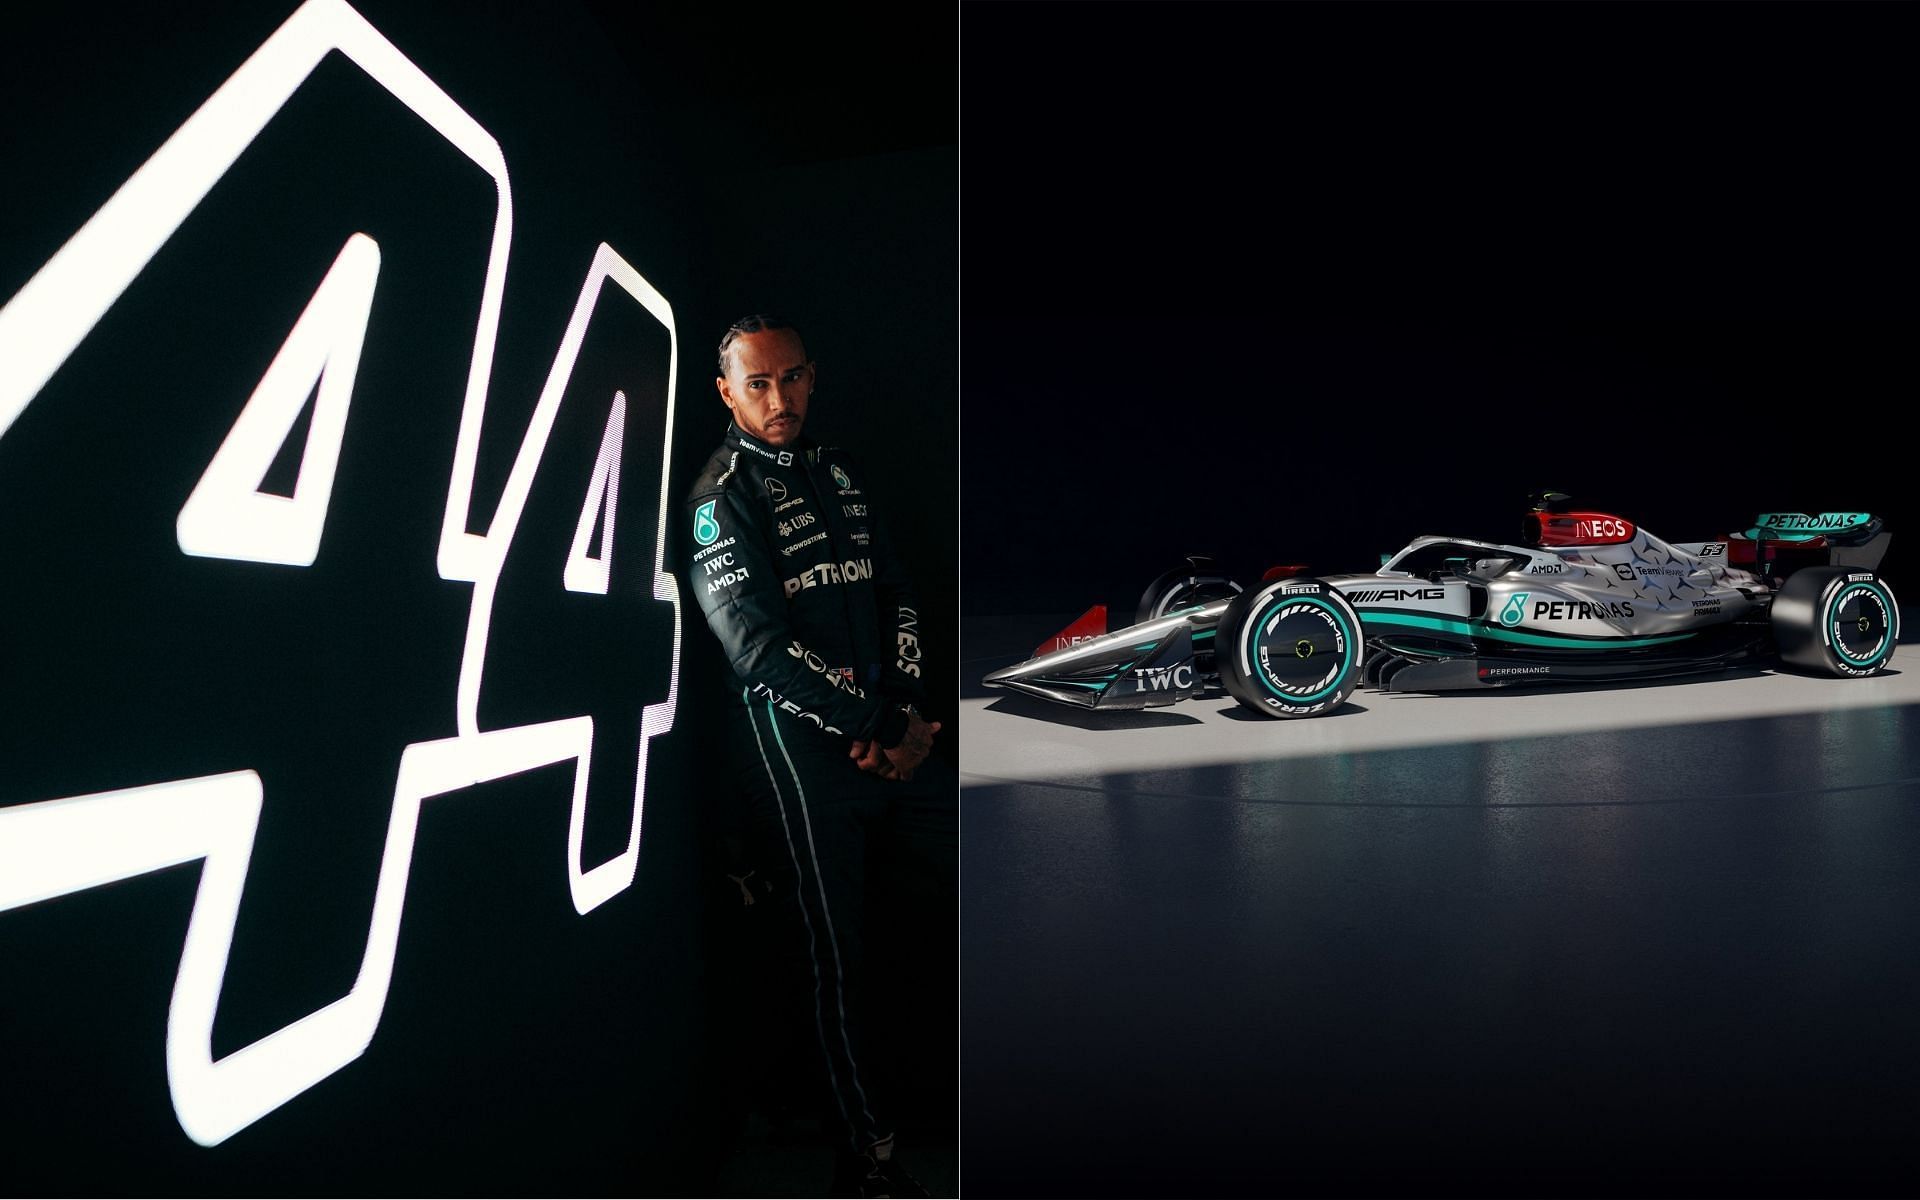 Lewis Hamilton (left) and the new Mercedes W13 (right) (Image Courtesy: @MercedesAMGF1 on Twitter)